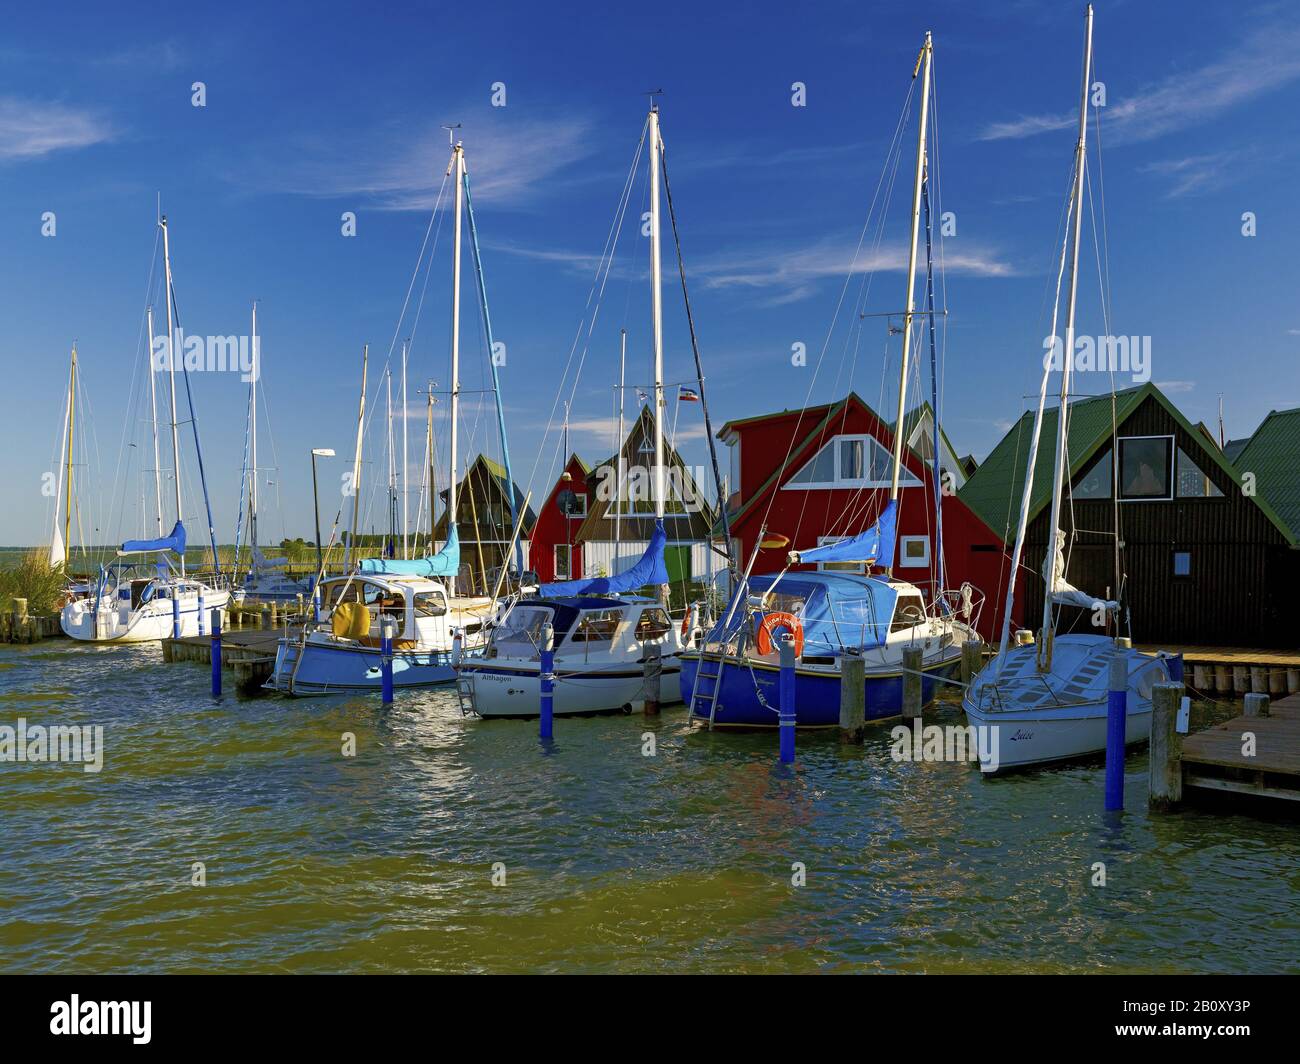 Sailing boats in the port of Althagen near Ahrenshoop, Fischland-Darss-Zingst, Mecklenburg-West Pomerania, Germany, Stock Photo